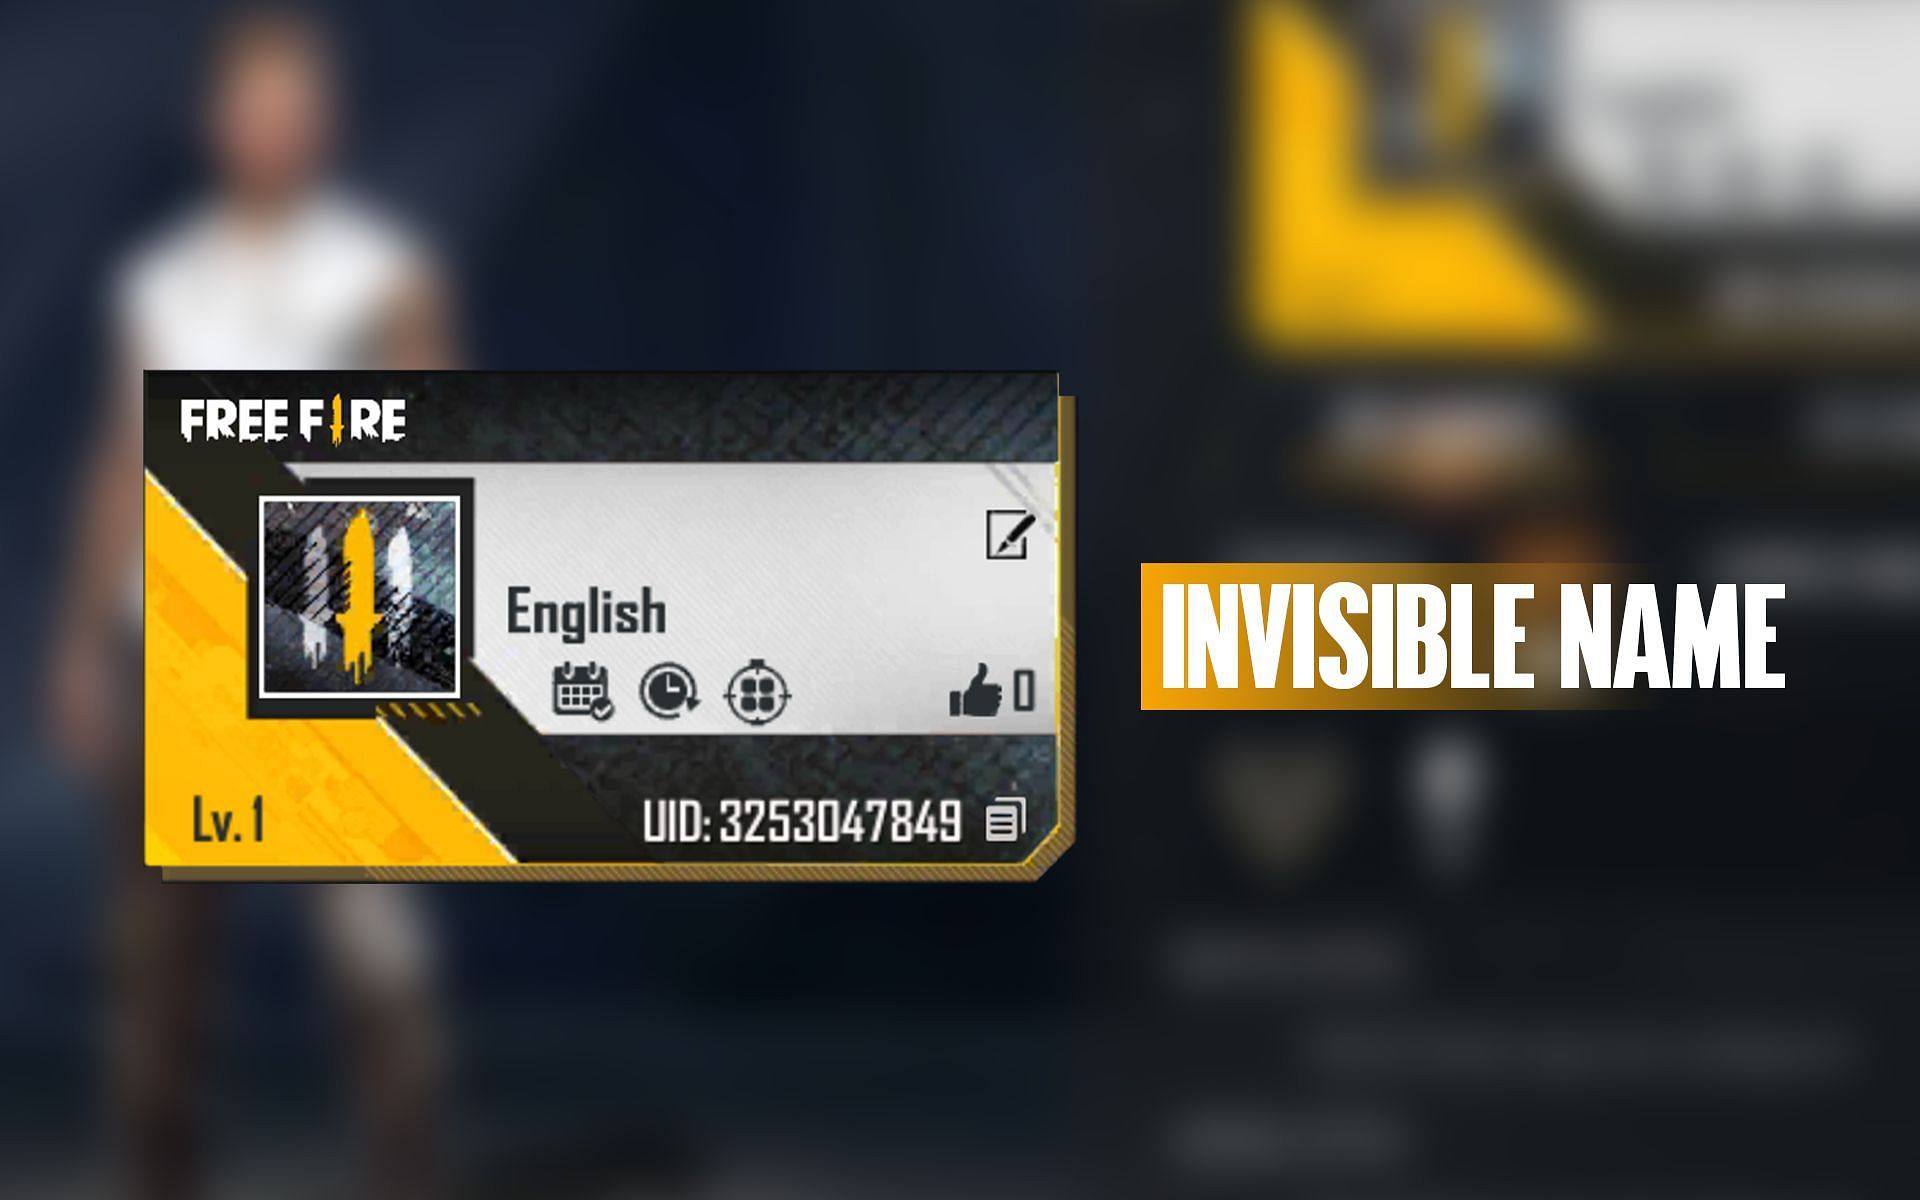 Invisible name is one of the tricks that players can utilize in Free Fire (Image via Sportskeeda)